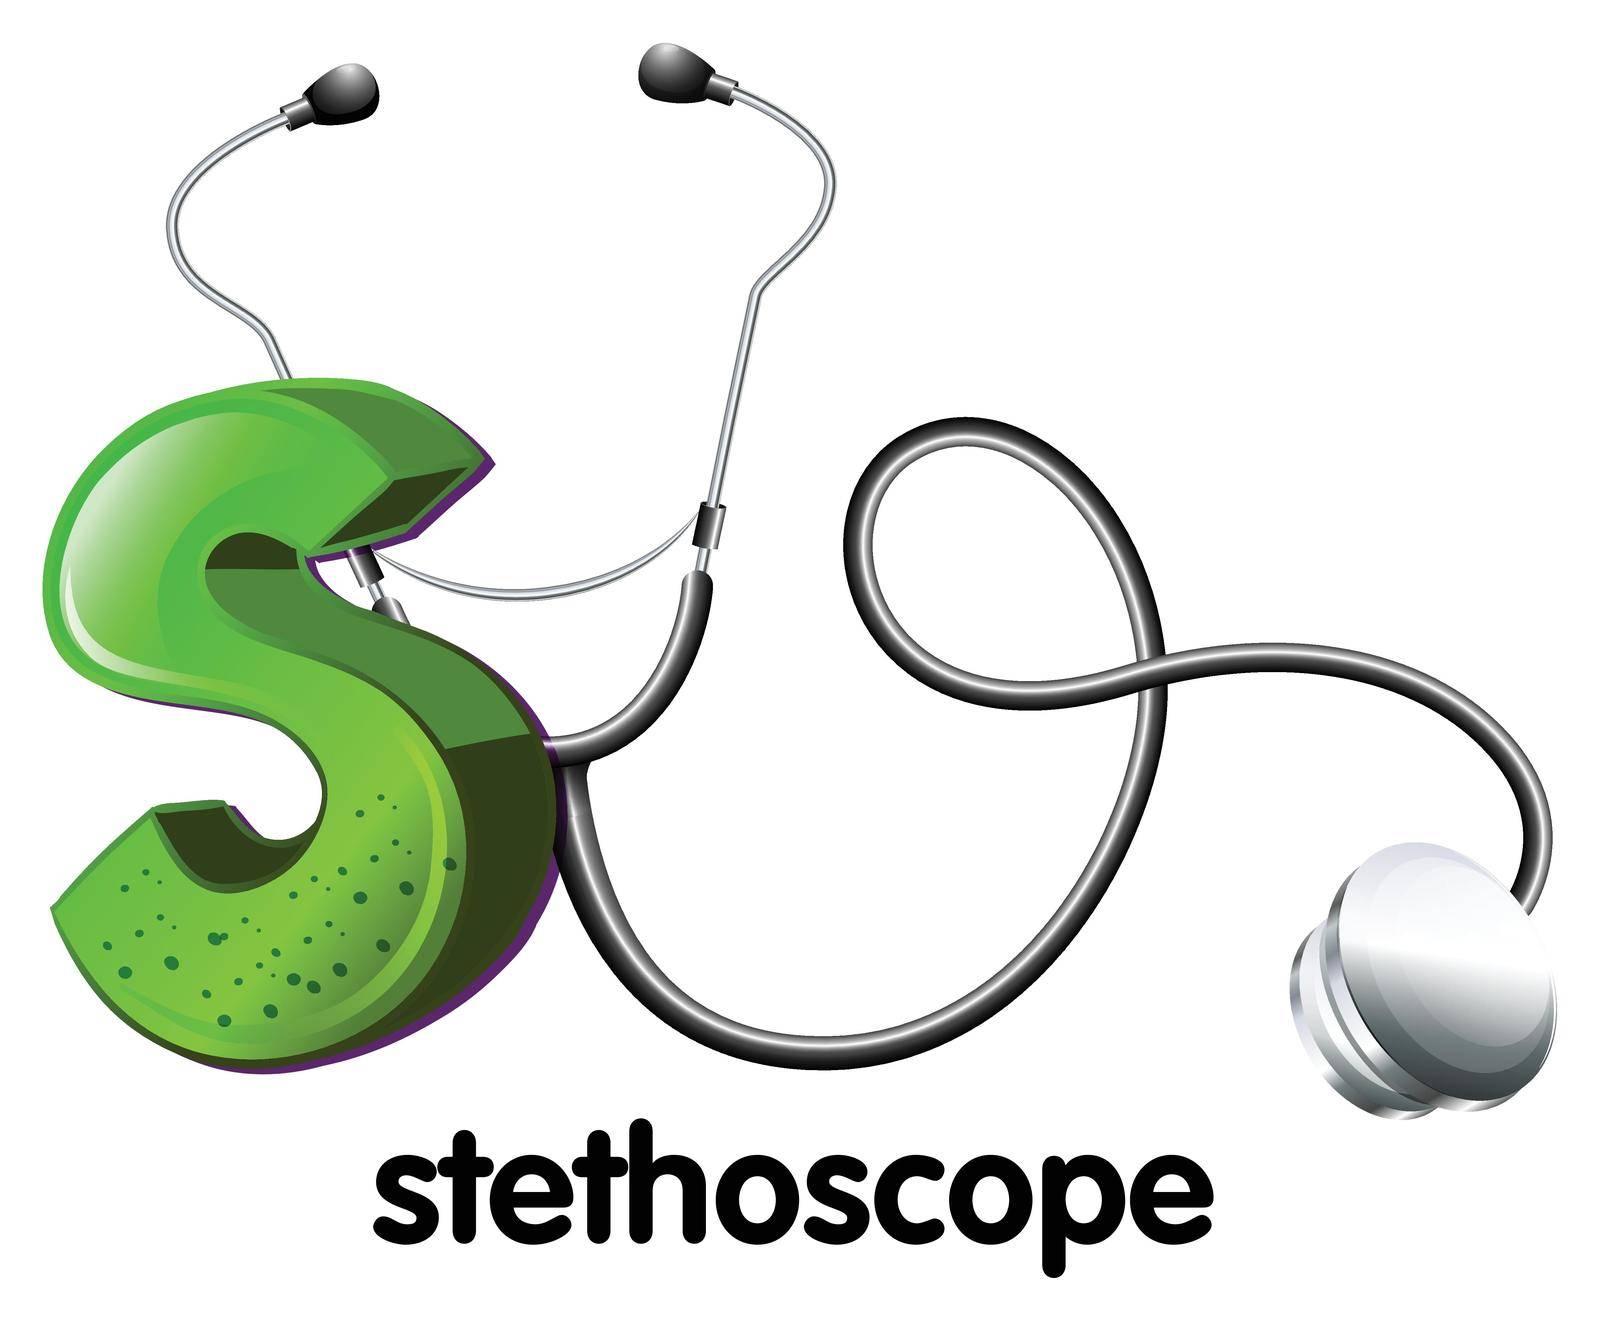 A letter S for stethoscope by iimages